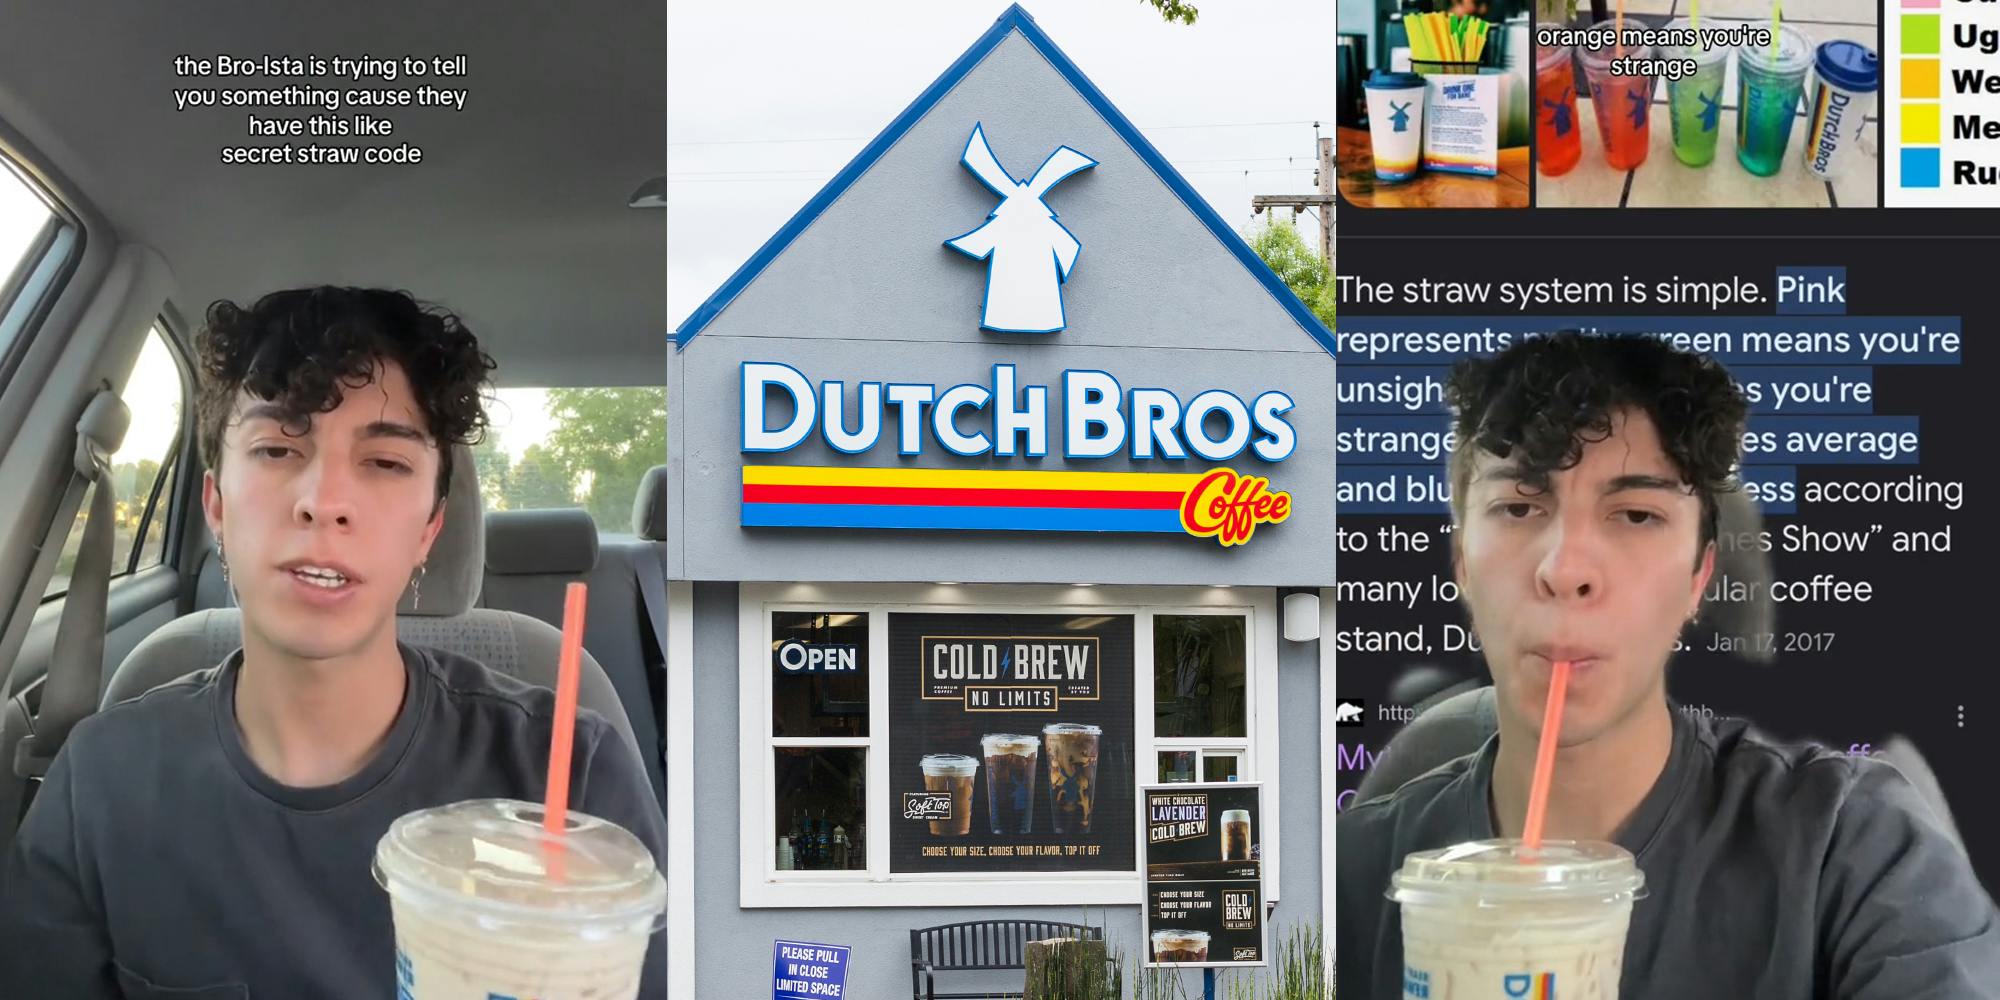 Dutch Bros customer speaking with drink with caption "the Bro-Ista is trying to tell you something cause they have like this secret straw code" (l) Dutch Bros building with sign (c) Dutch Bros customer greenscreen TikTok speaking over straw codes with drink with caption "orange means you're strange" (r)